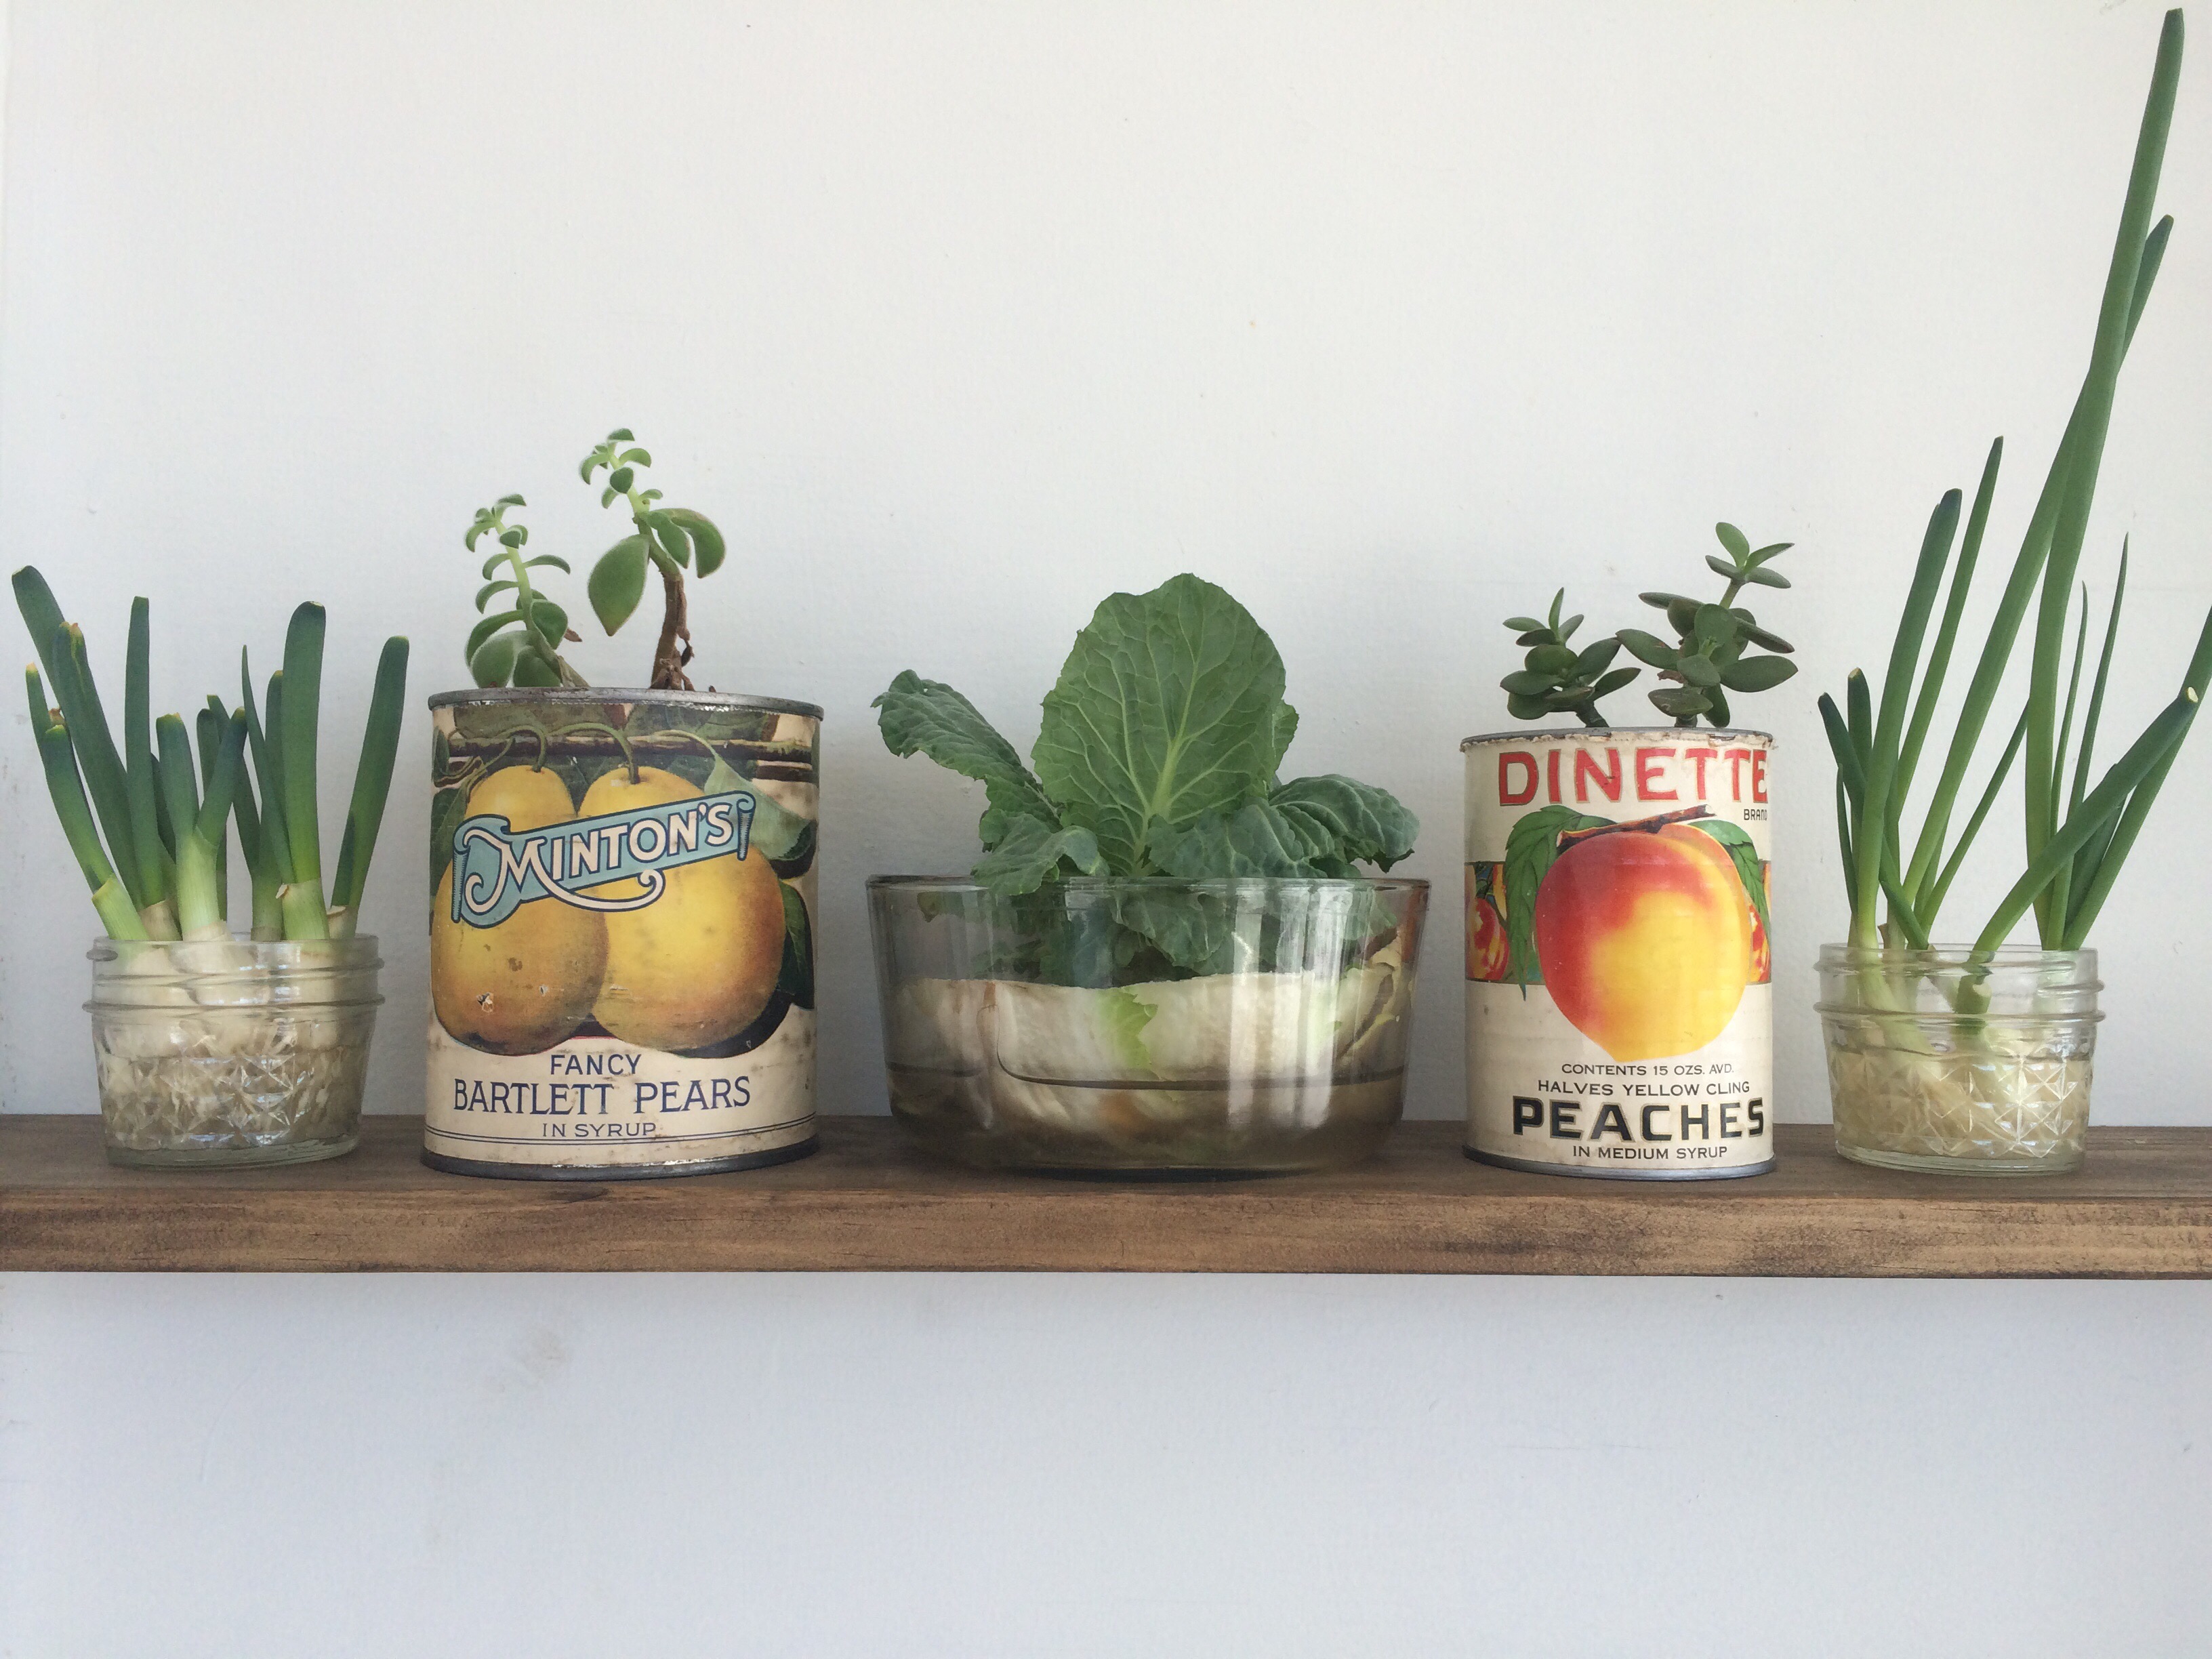 How to Regrow Your Own Vegetables Without Soil